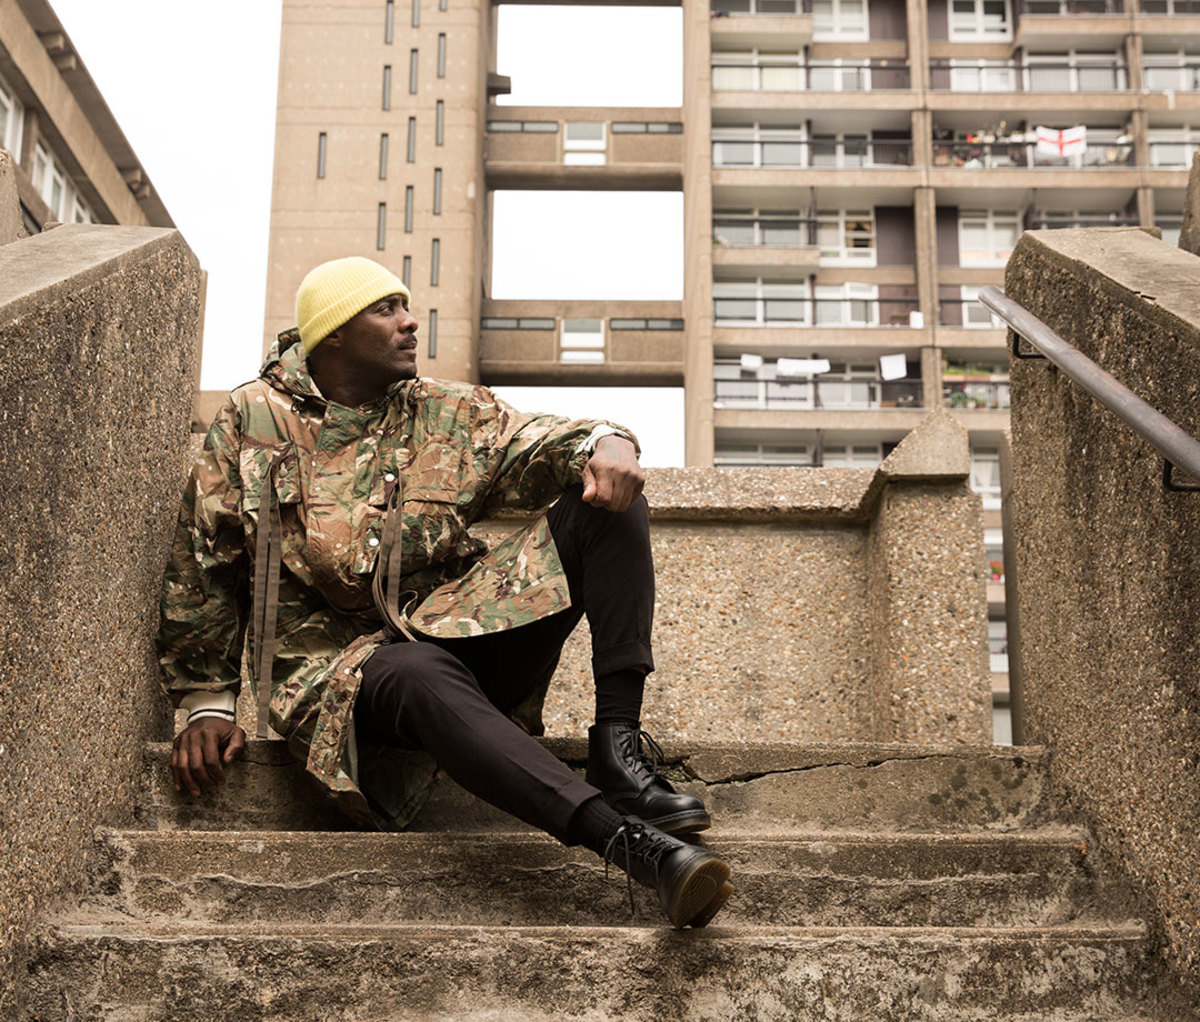 Actor Idris Elba wearing yellow beanie and camo-printed jacket sitting on concrete steps